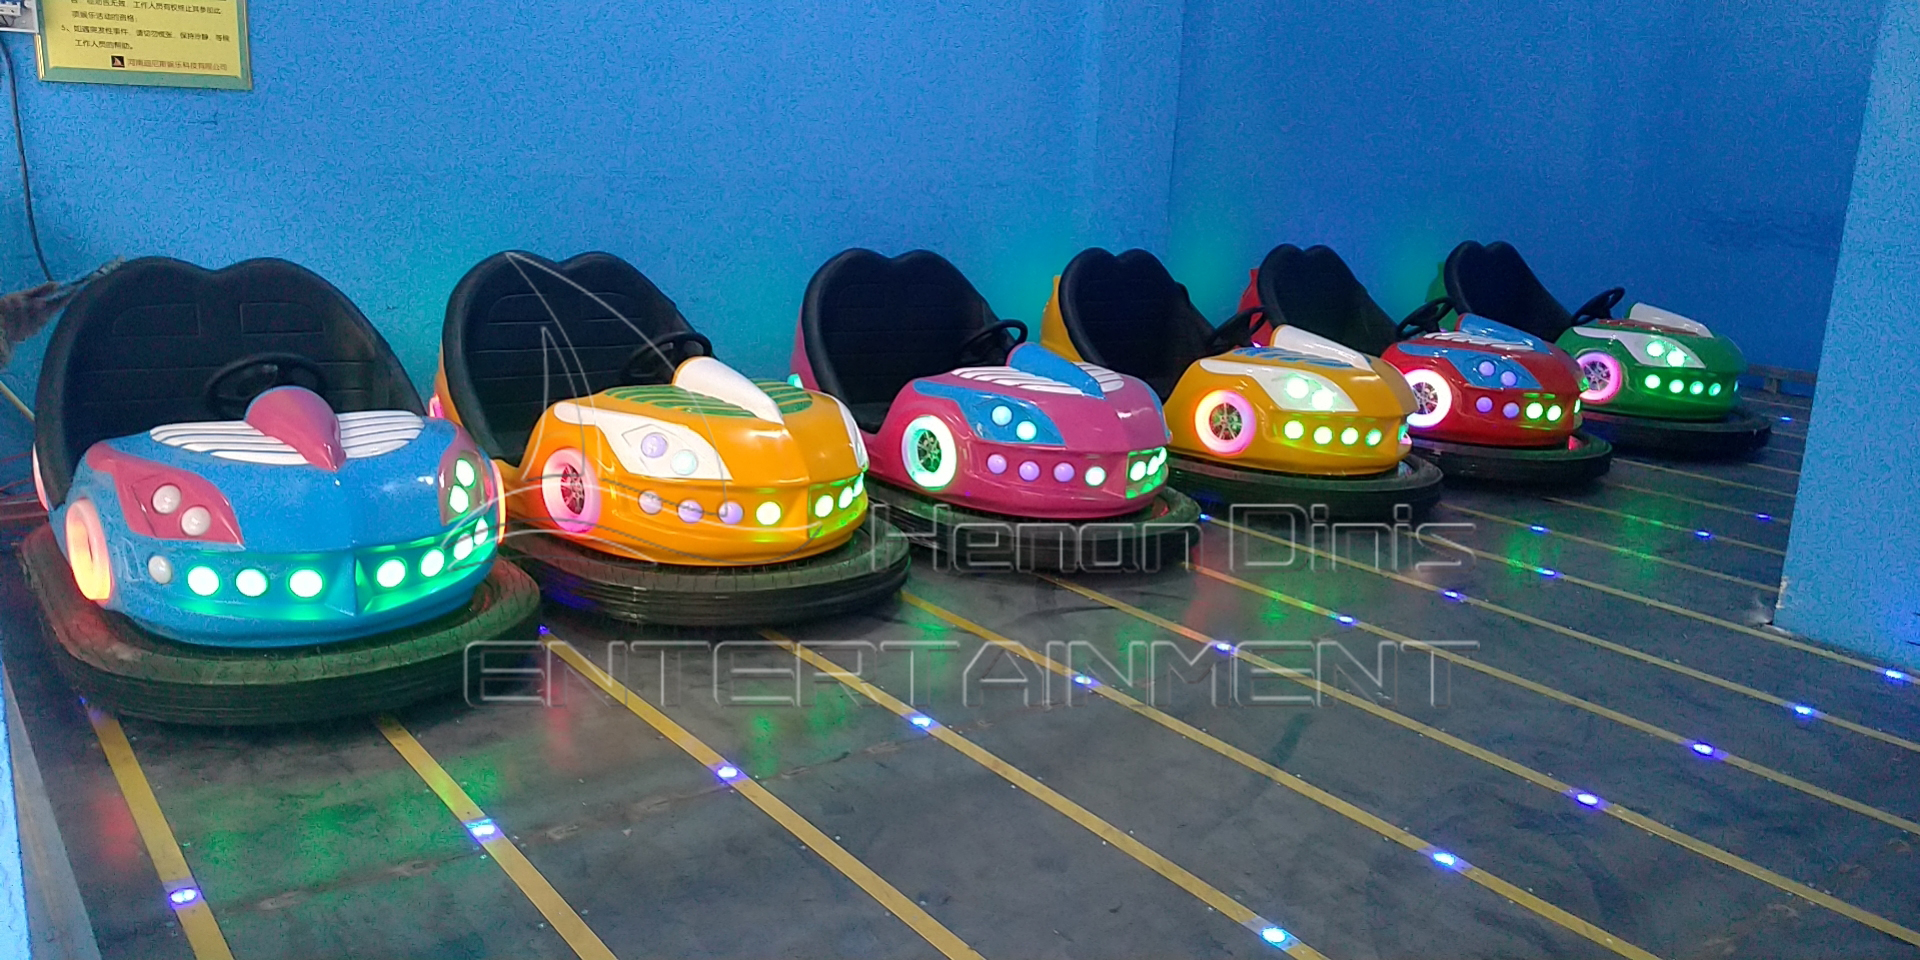 The feedback of bumper car ride from our client